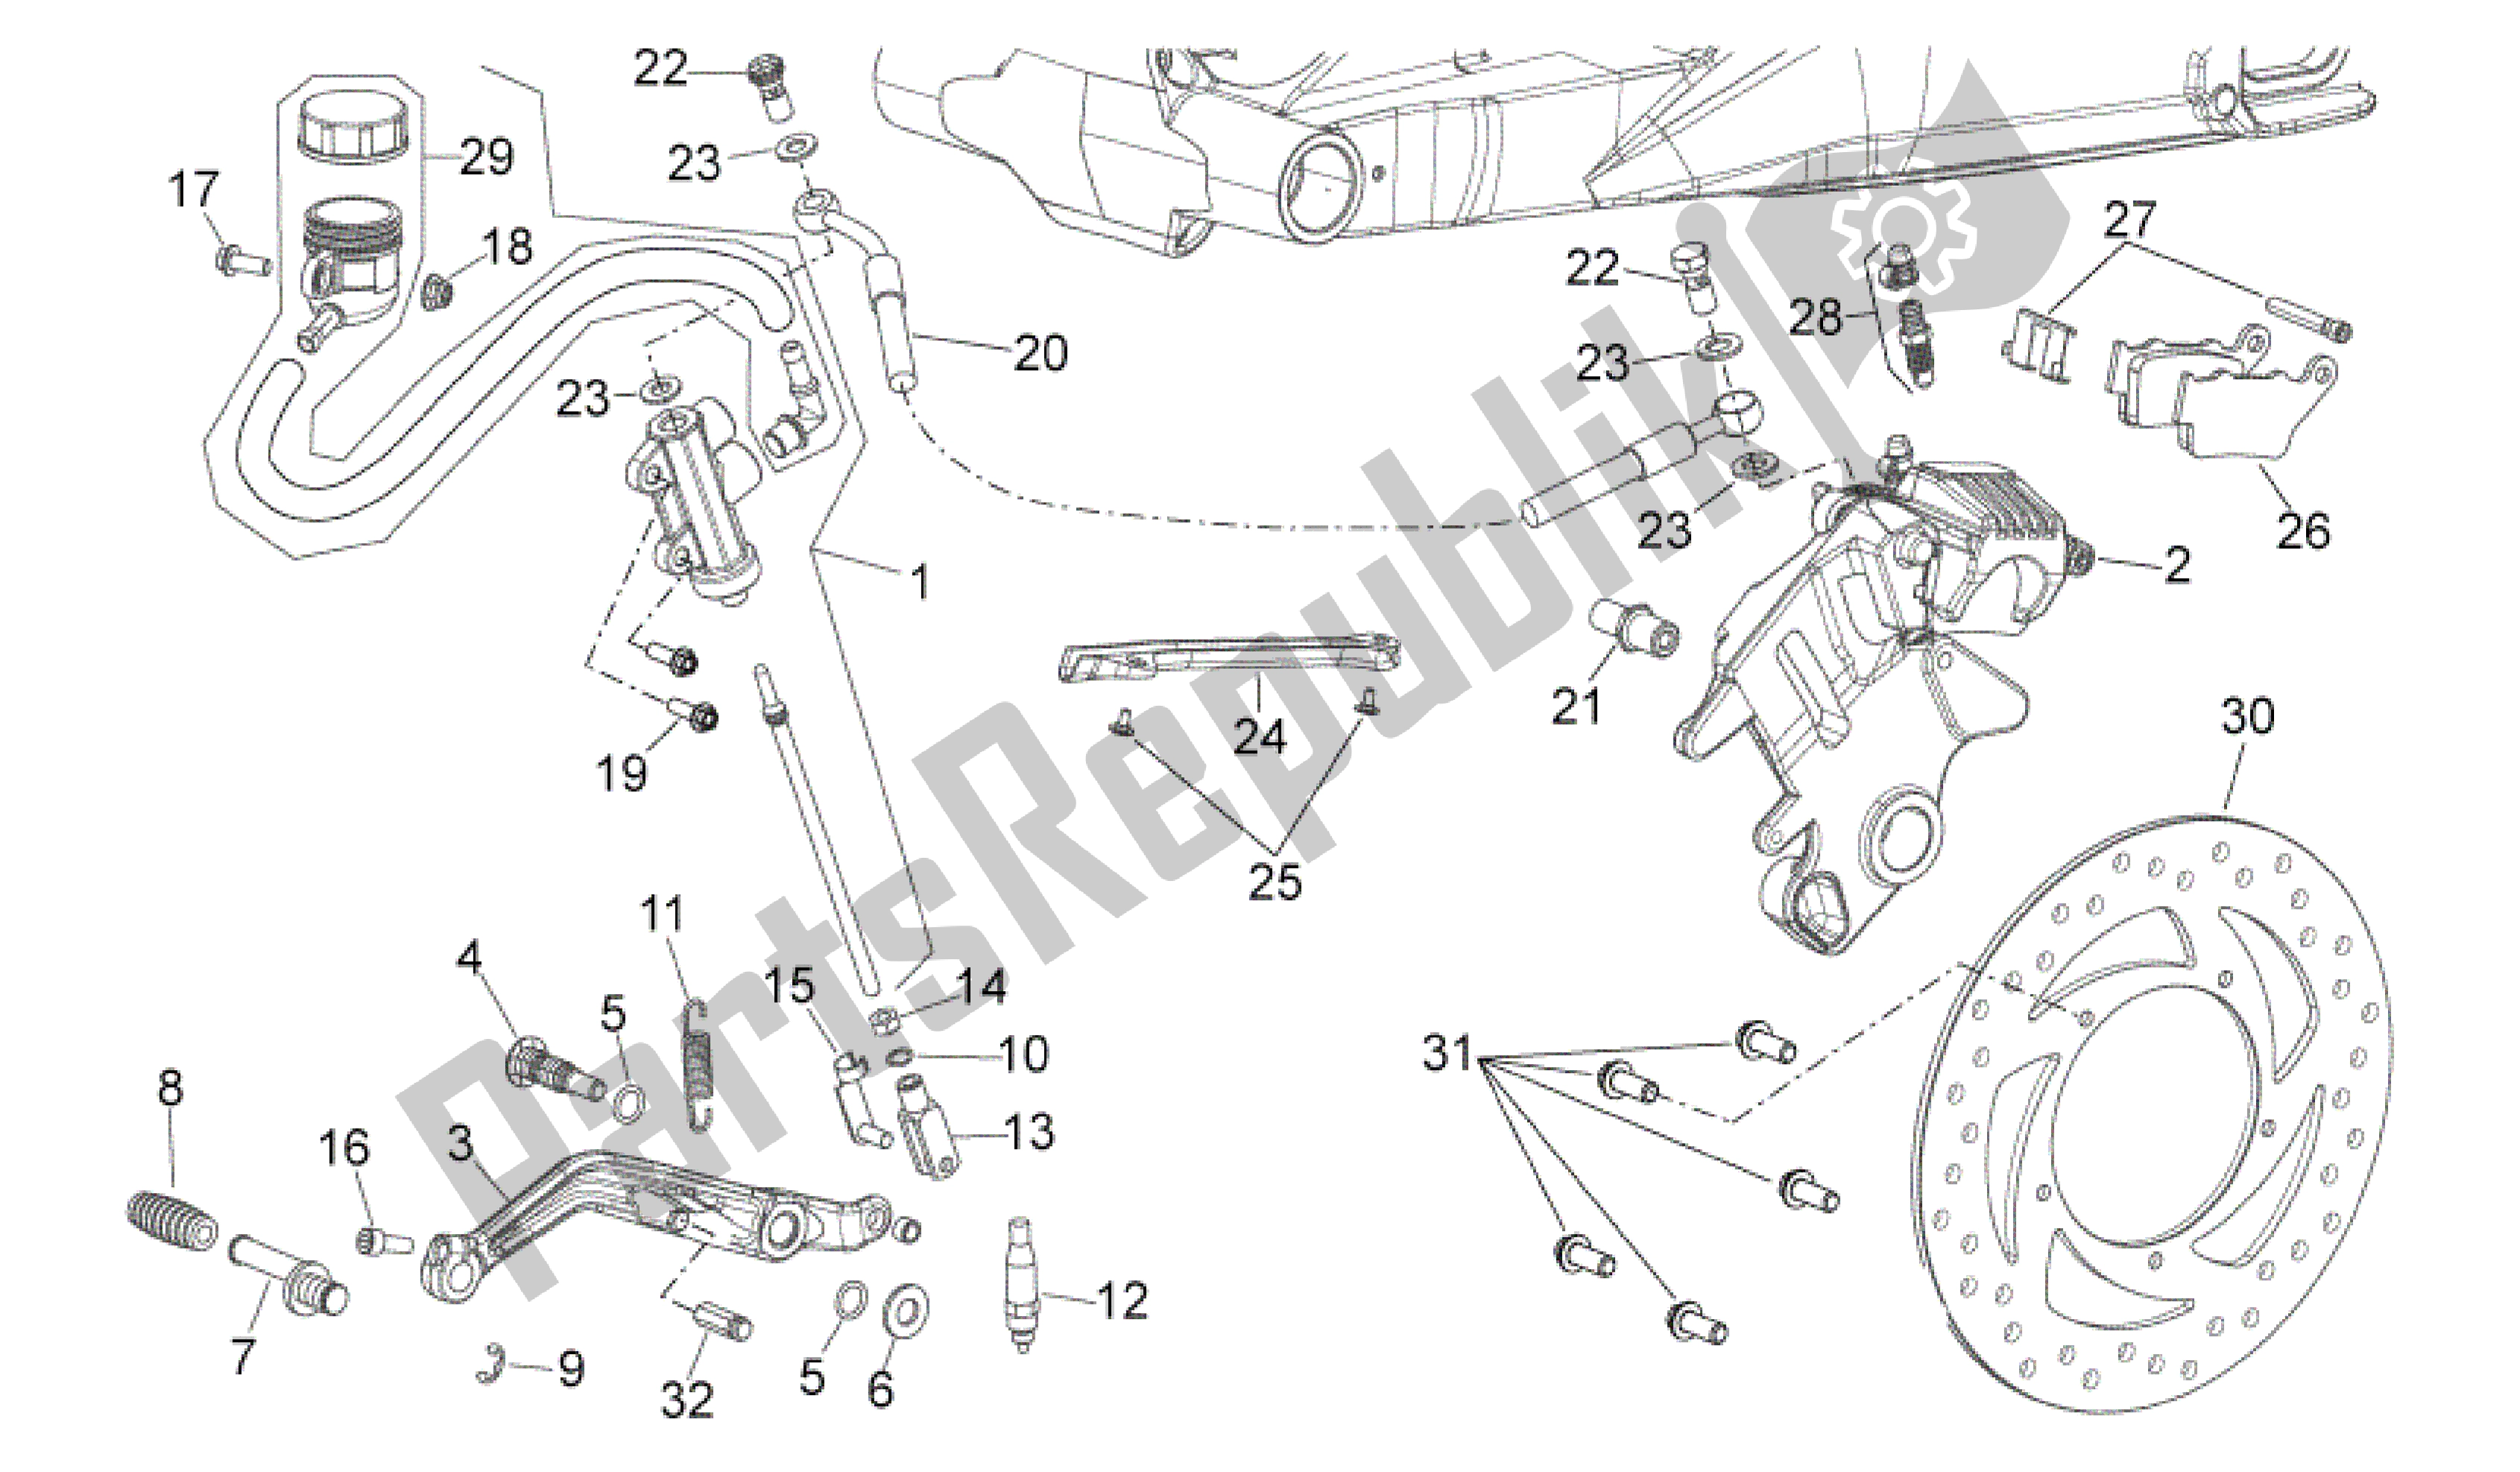 All parts for the Rear Brake System of the Aprilia Shiver 750 2007 - 2009